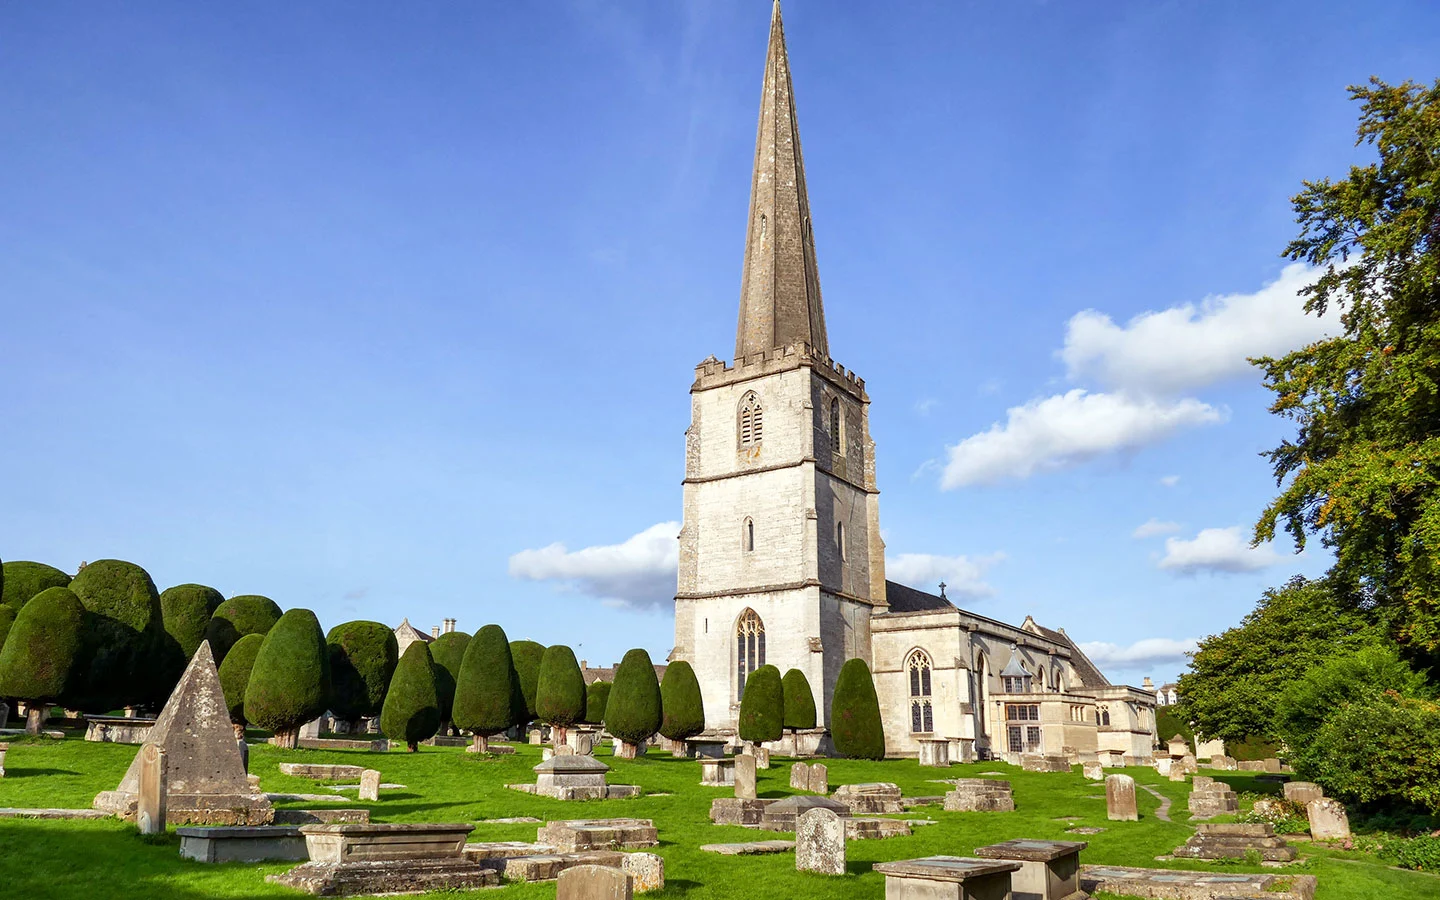 St Mary's Church in Painswick in the Cotswolds